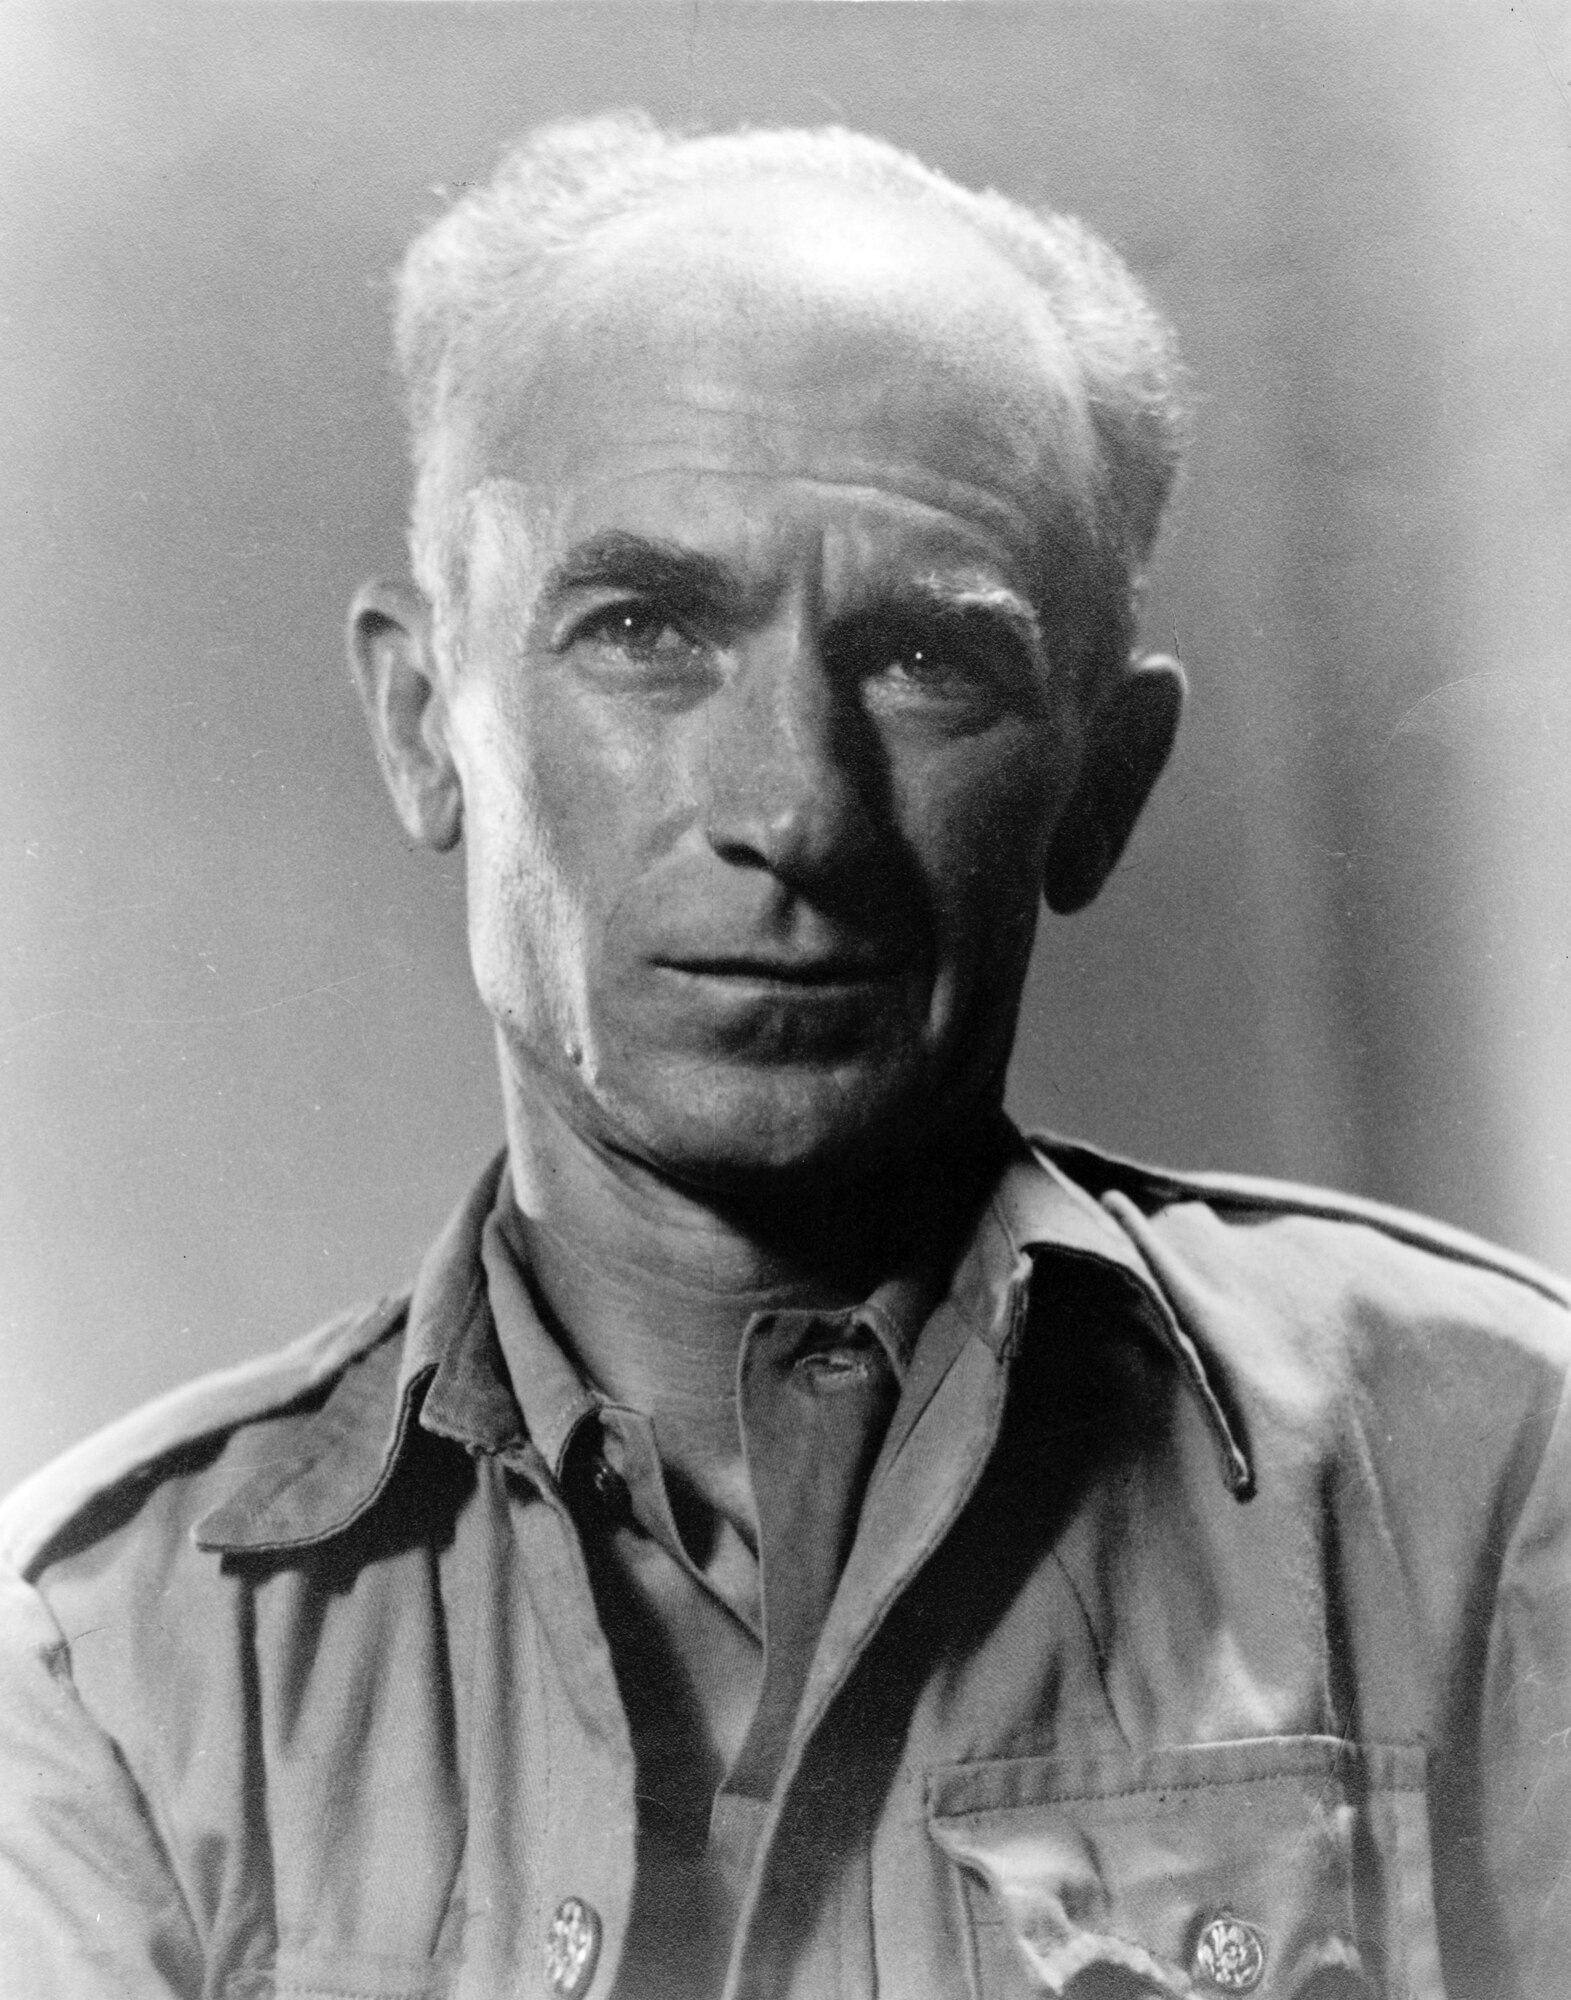 Ernie Pyle’s portrait. Pyle’s “Everyman” approach to writing about the war won him many praises among the service members he worked with in combat.